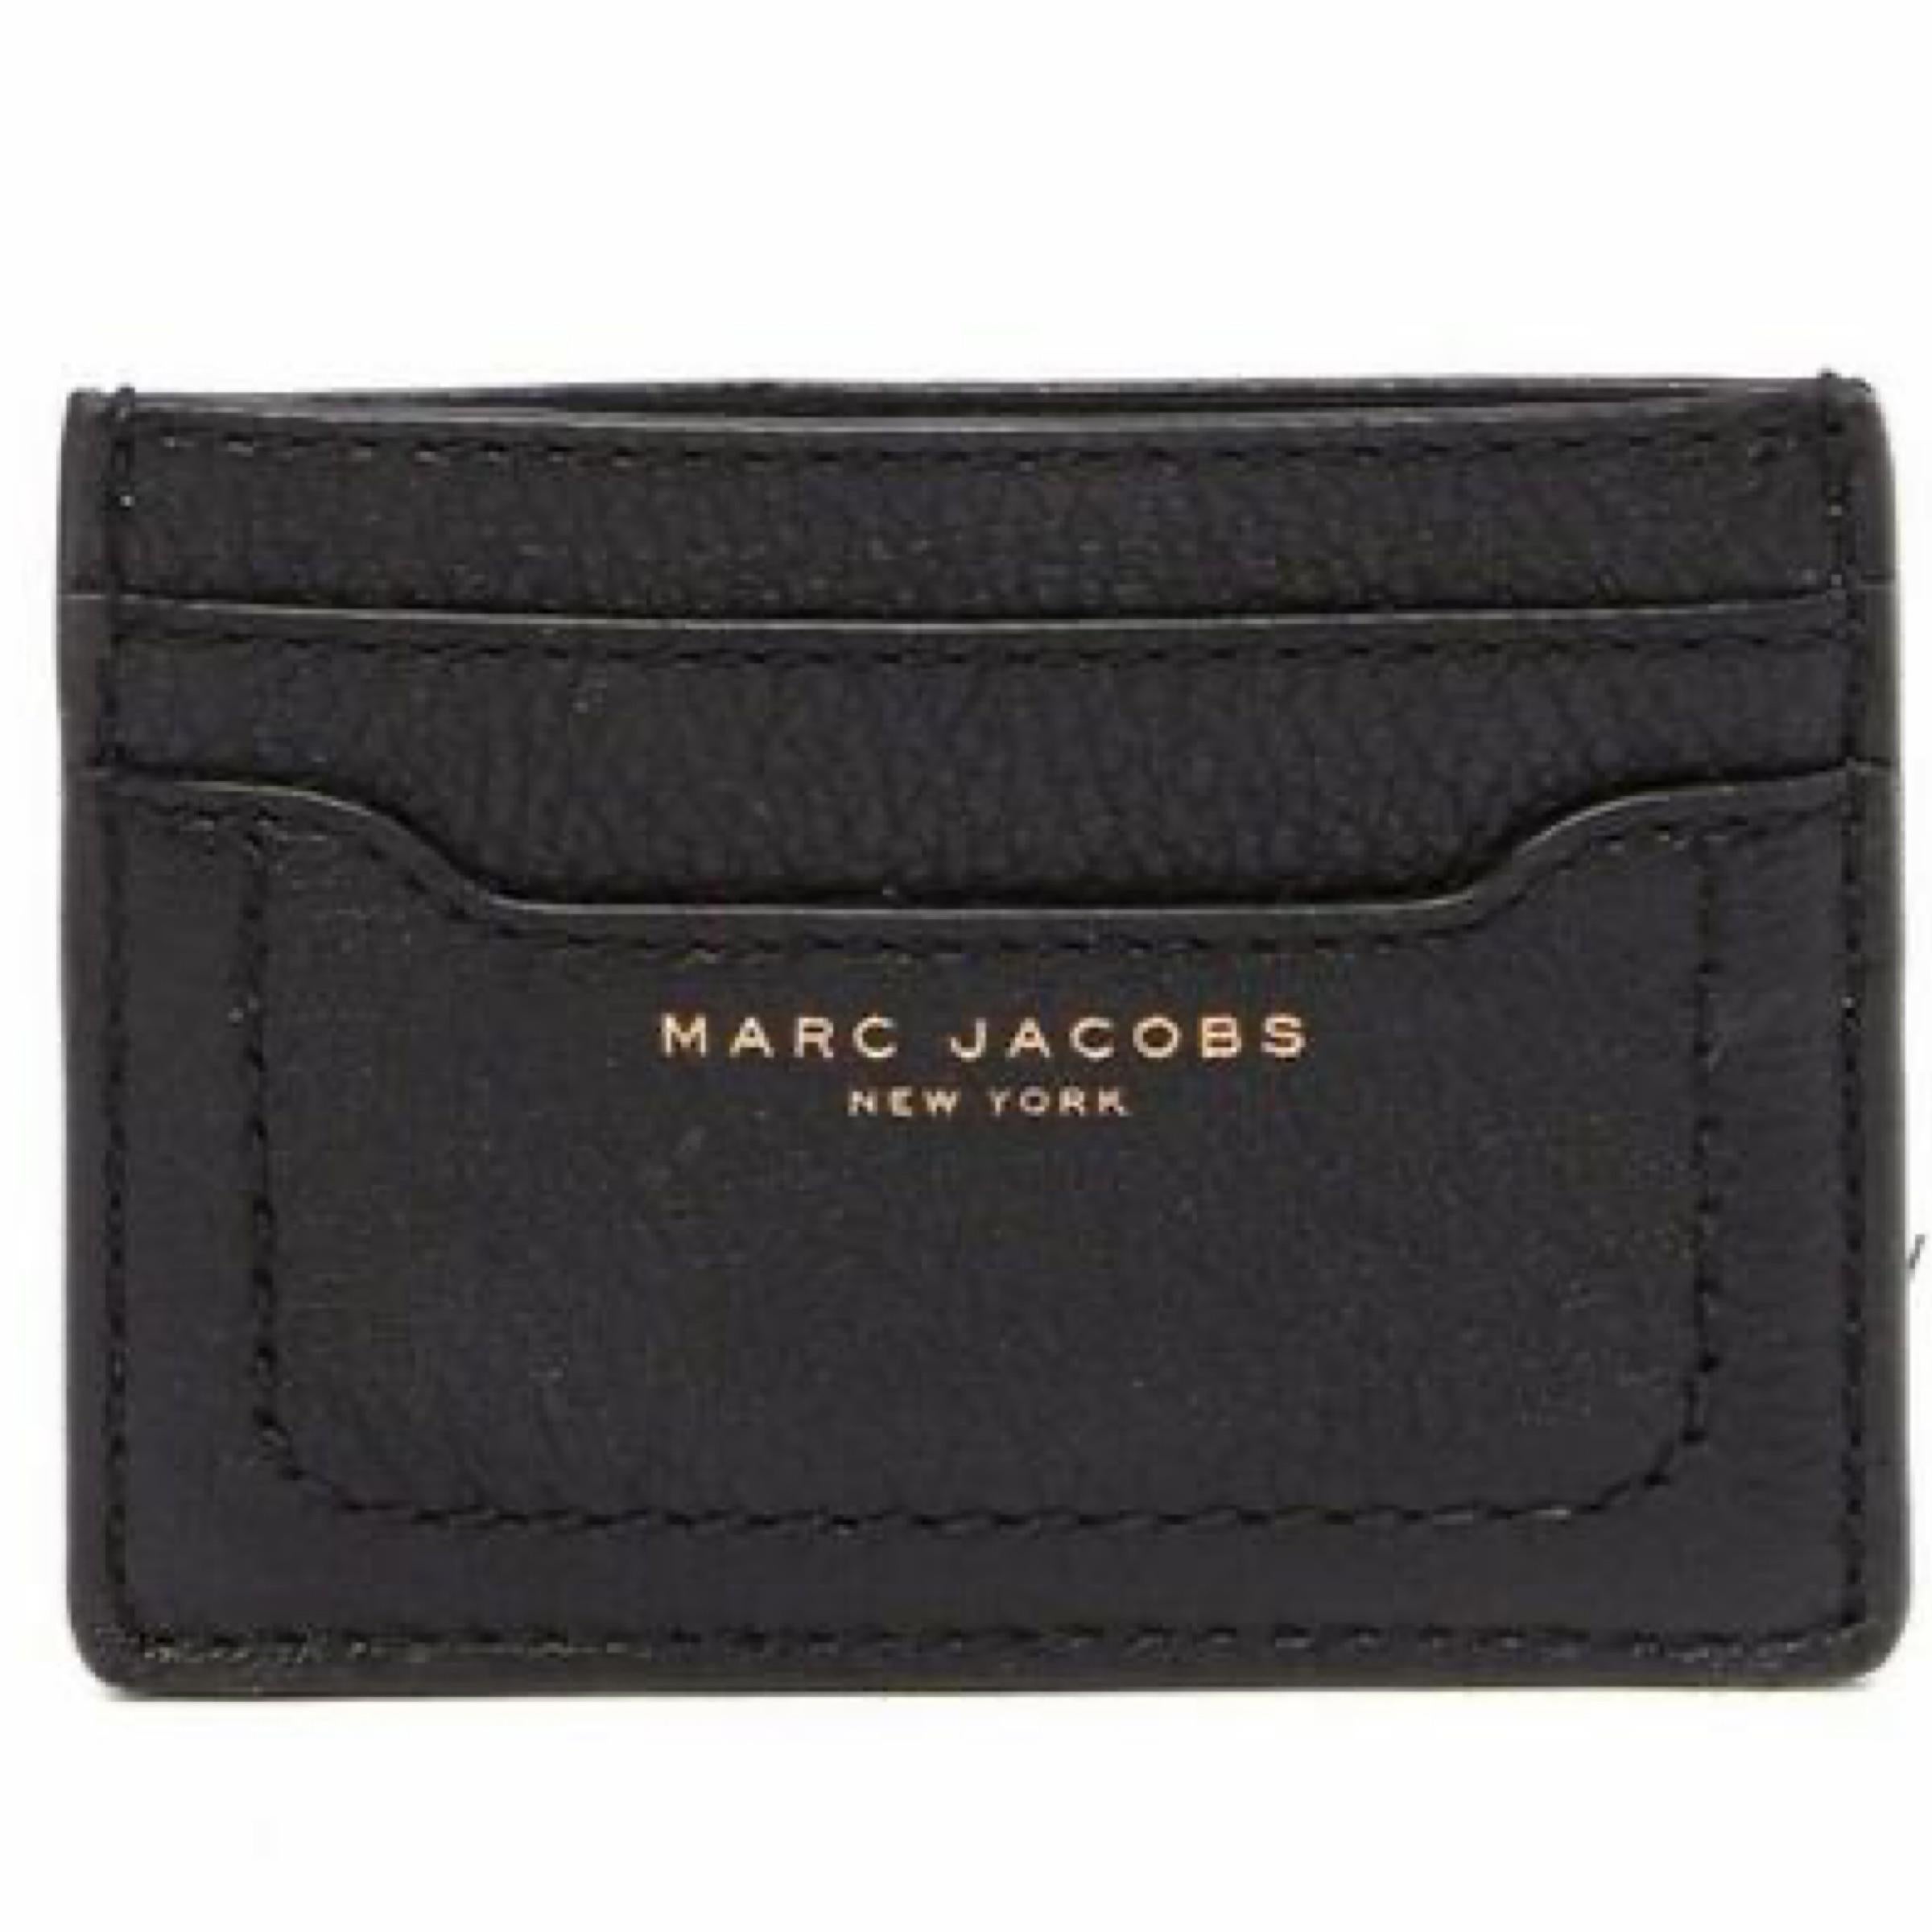 New Marc Jacobs Black Gold Logo Leather Card Holder Wallet

Authenticity Guaranteed

DETAILS
Brand: Marc Jacobs
Gender: Unisex
Category: Card holder
Condition: Brand new
Color: Black
Material: Leather
Front gold logo
1 bill slot
4 card